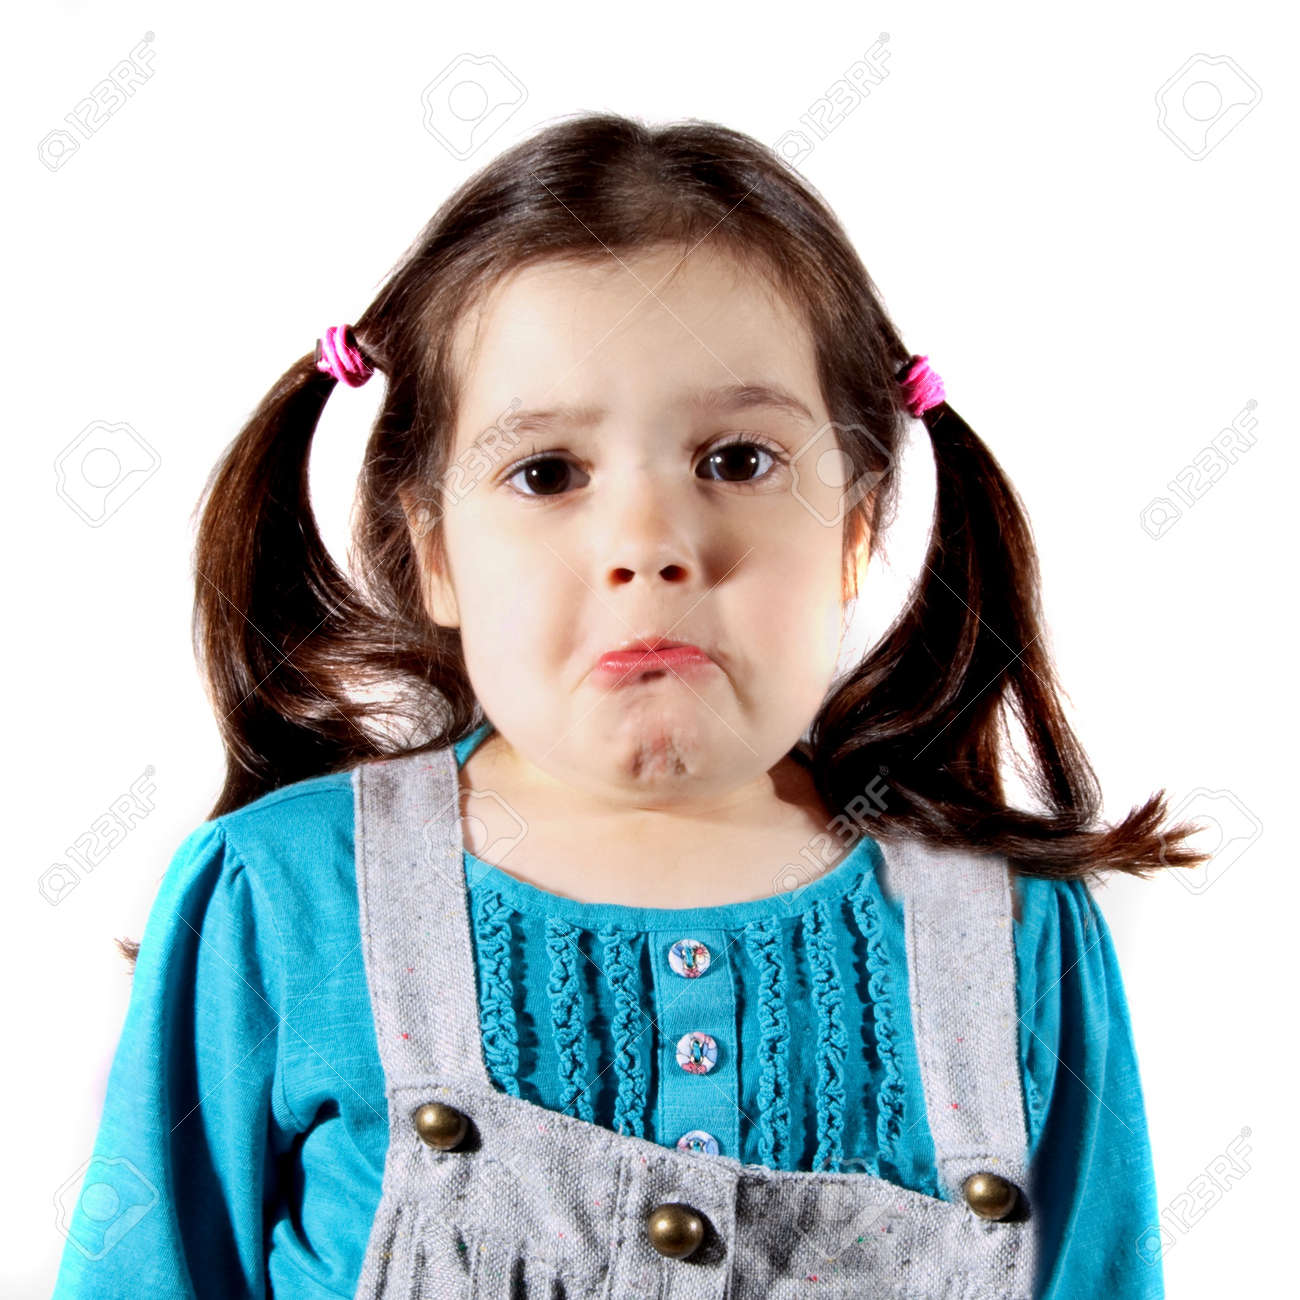 9489199-young-girl-upset-and-about-to-cry-Stock-Photo.jpg